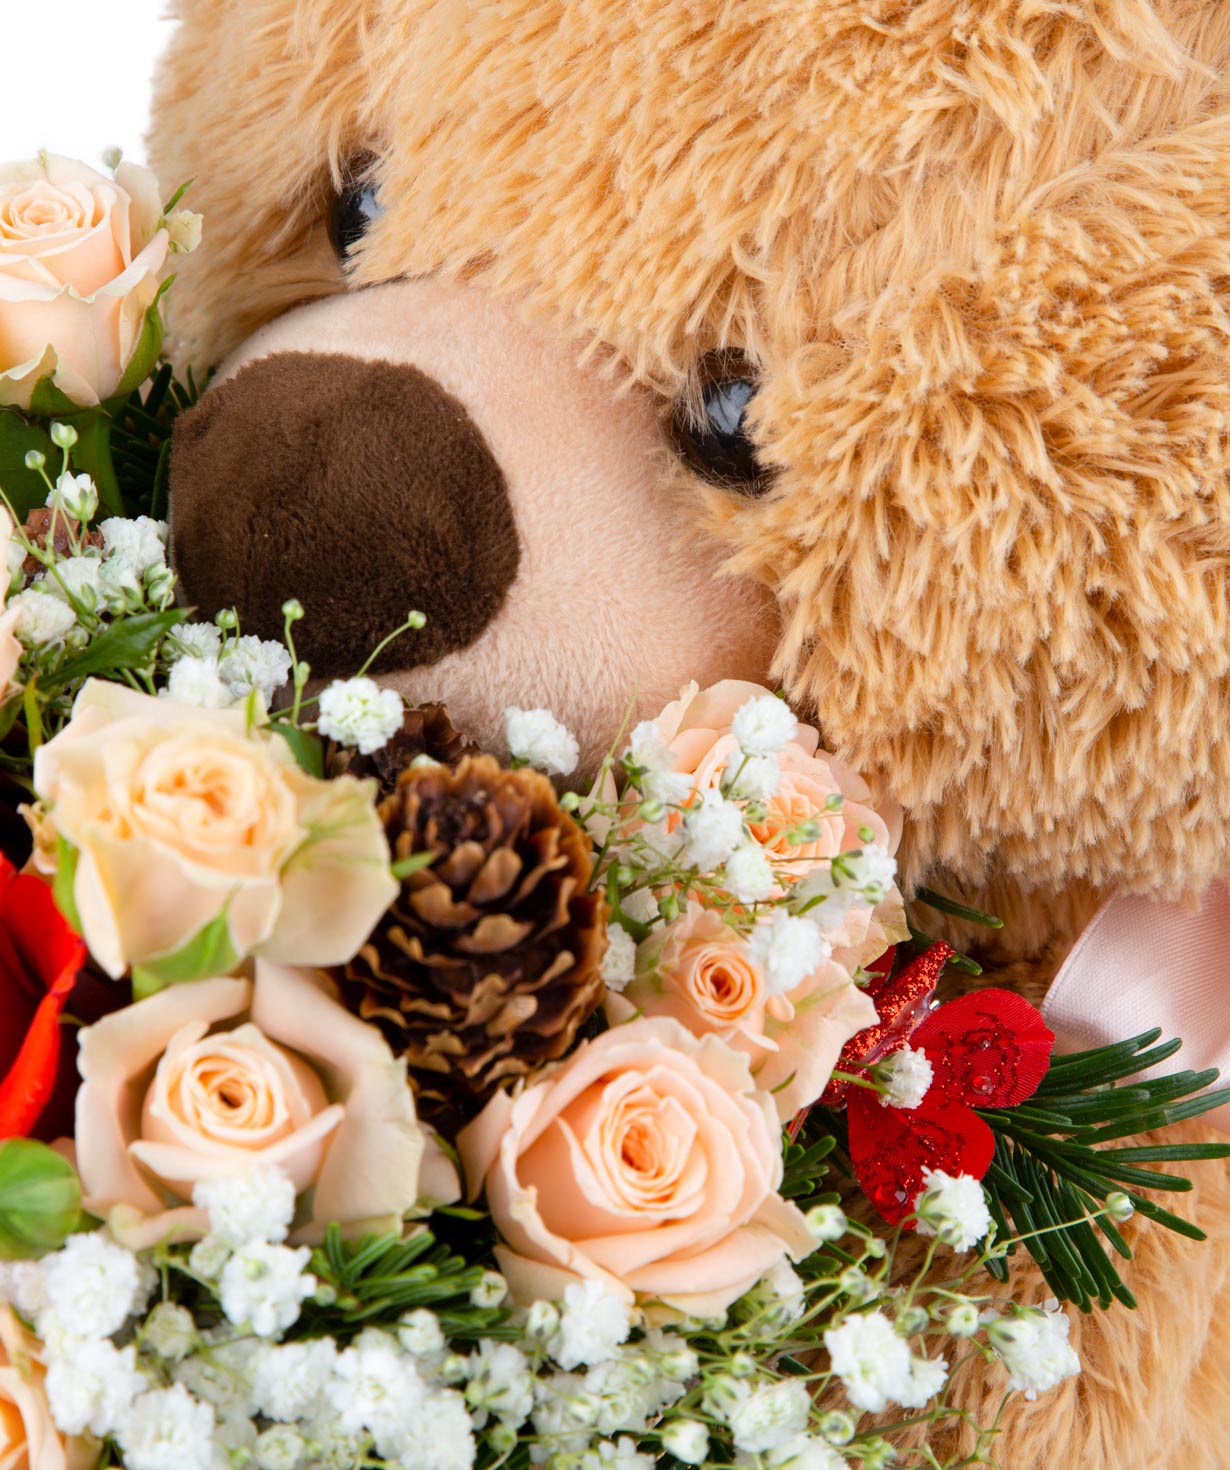 Composition ''Surprise'' with a teddy bear toy, roses, gypsophila, and Xmas tree branches